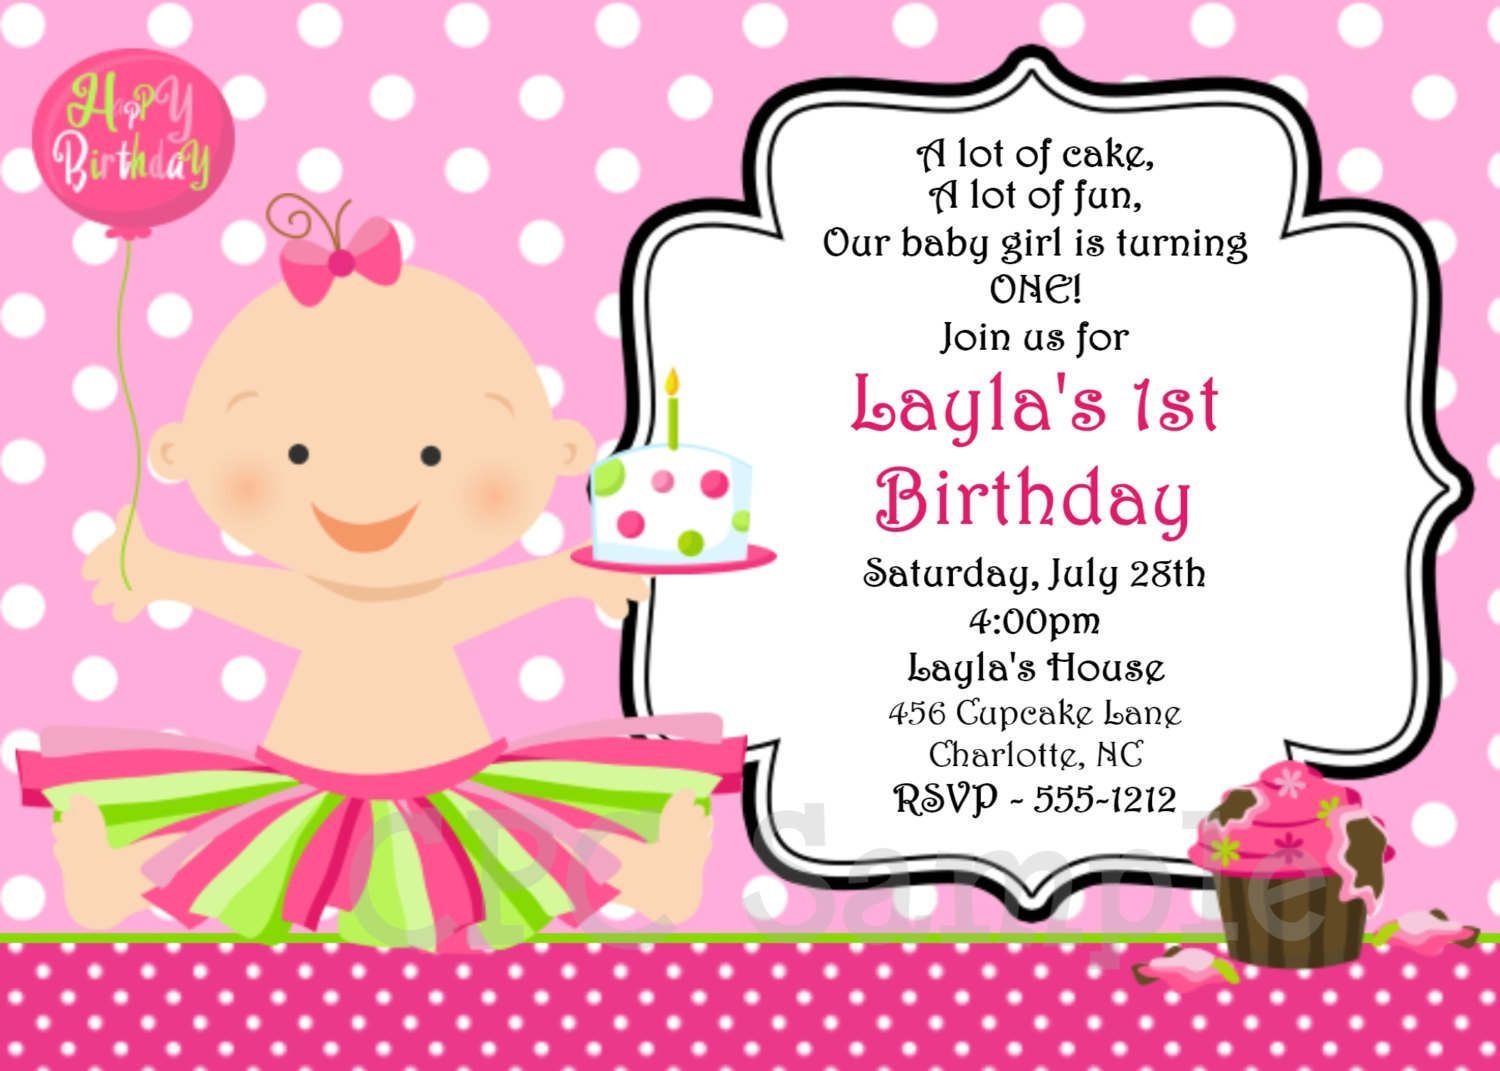 Party Invitation Online Maker Free - Demir.iso-Consulting.co - Make Printable Party Invitations Online Free